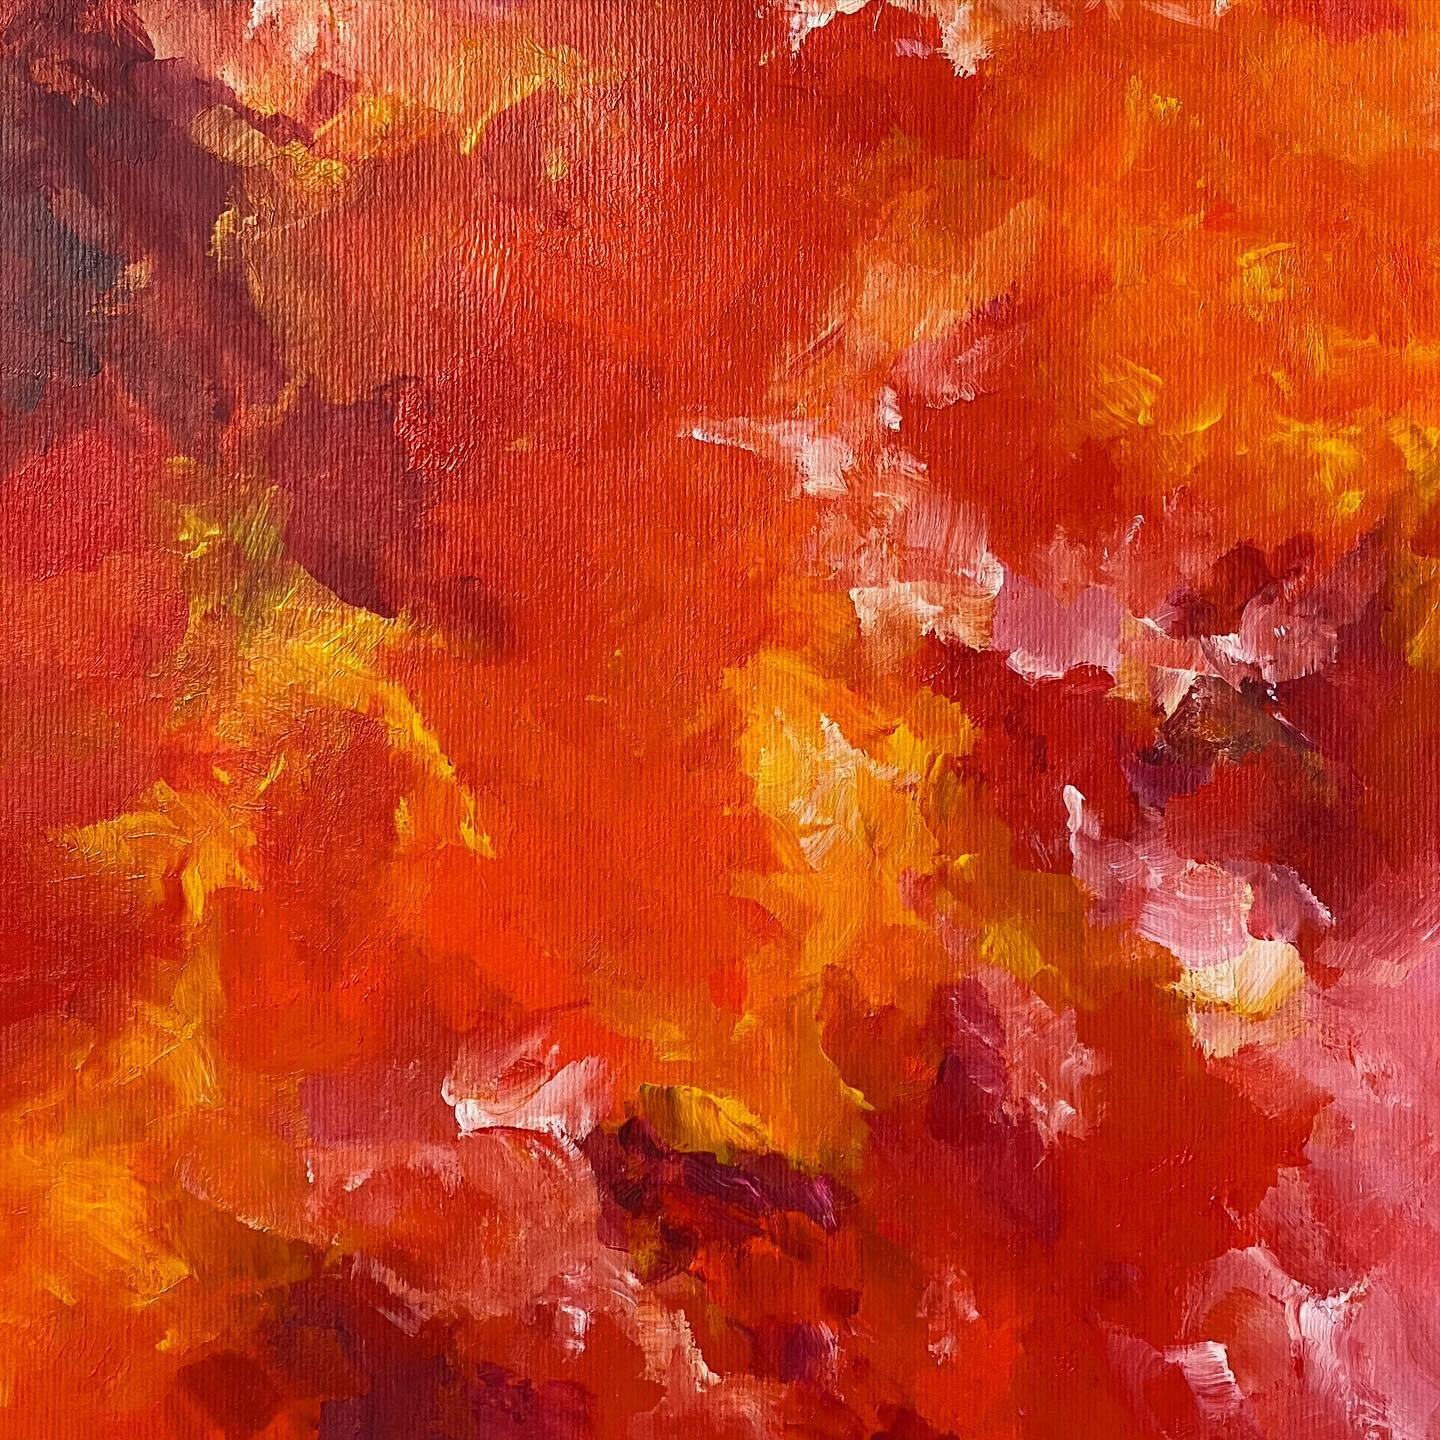 In opposition to soothing ocean blues, today we are feeling frenetic, flaming reds...
.
#meggs #houseofmeggs #artist #art #abstractart #abstractpainting #abstractexpressionism #studiolife #lockdown2020 #artistsoninstagram  #artistsofinstagram #inspir